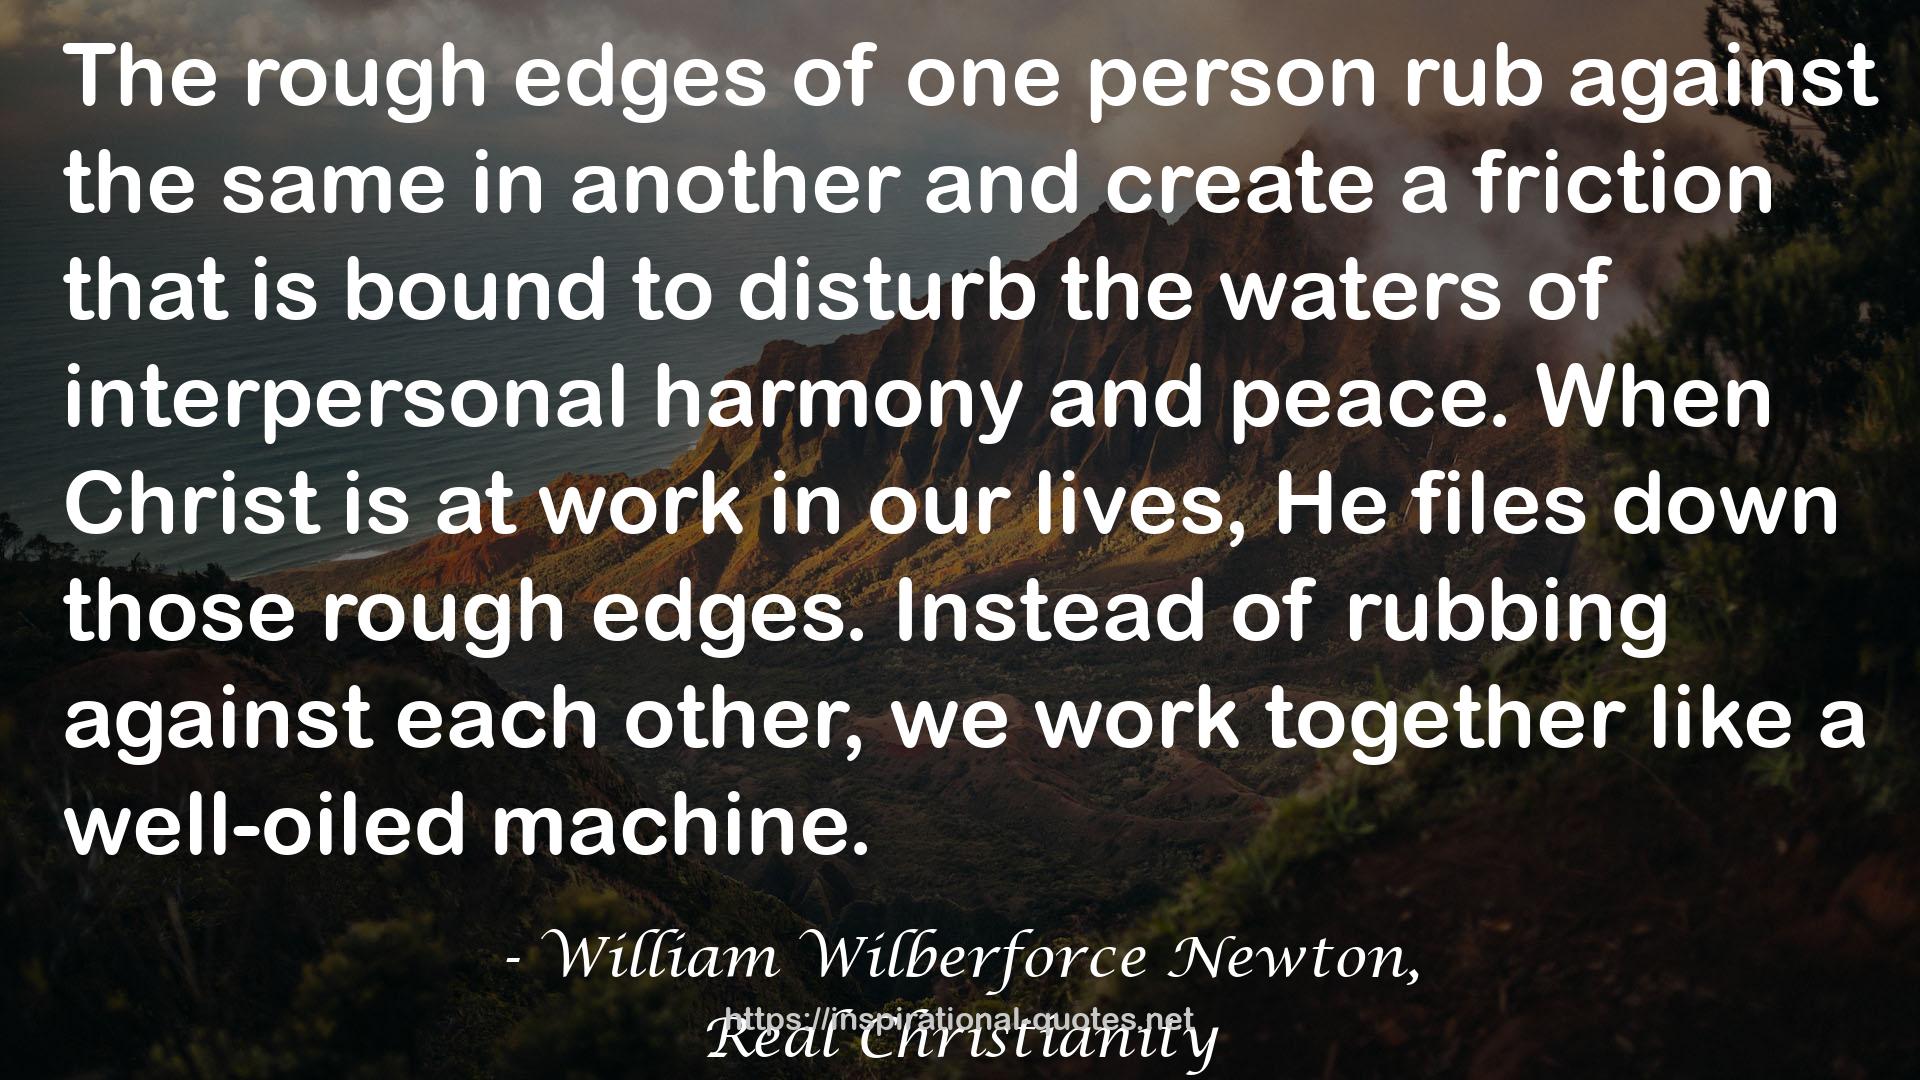 William Wilberforce Newton, QUOTES